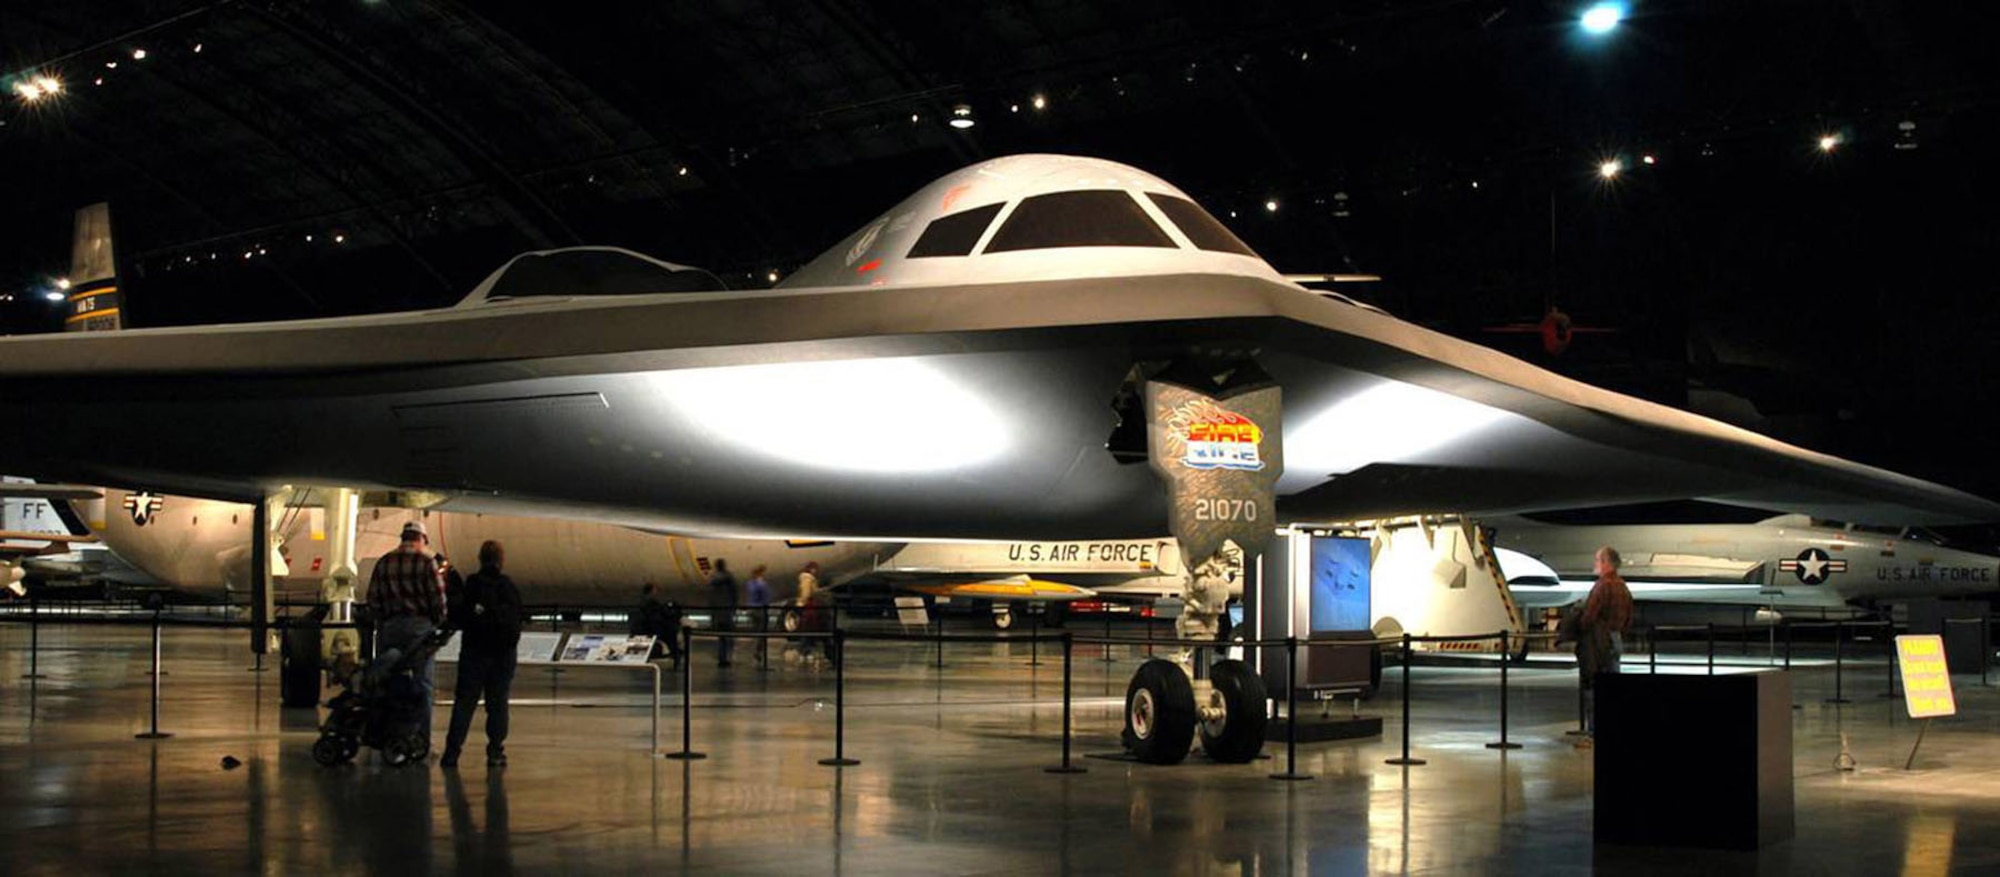 DAYTON, Ohio -- Northrop B-2 Spirit in the Cold War Gallery at the National Museum of the United States Air Force. (U.S. Air Force photo)